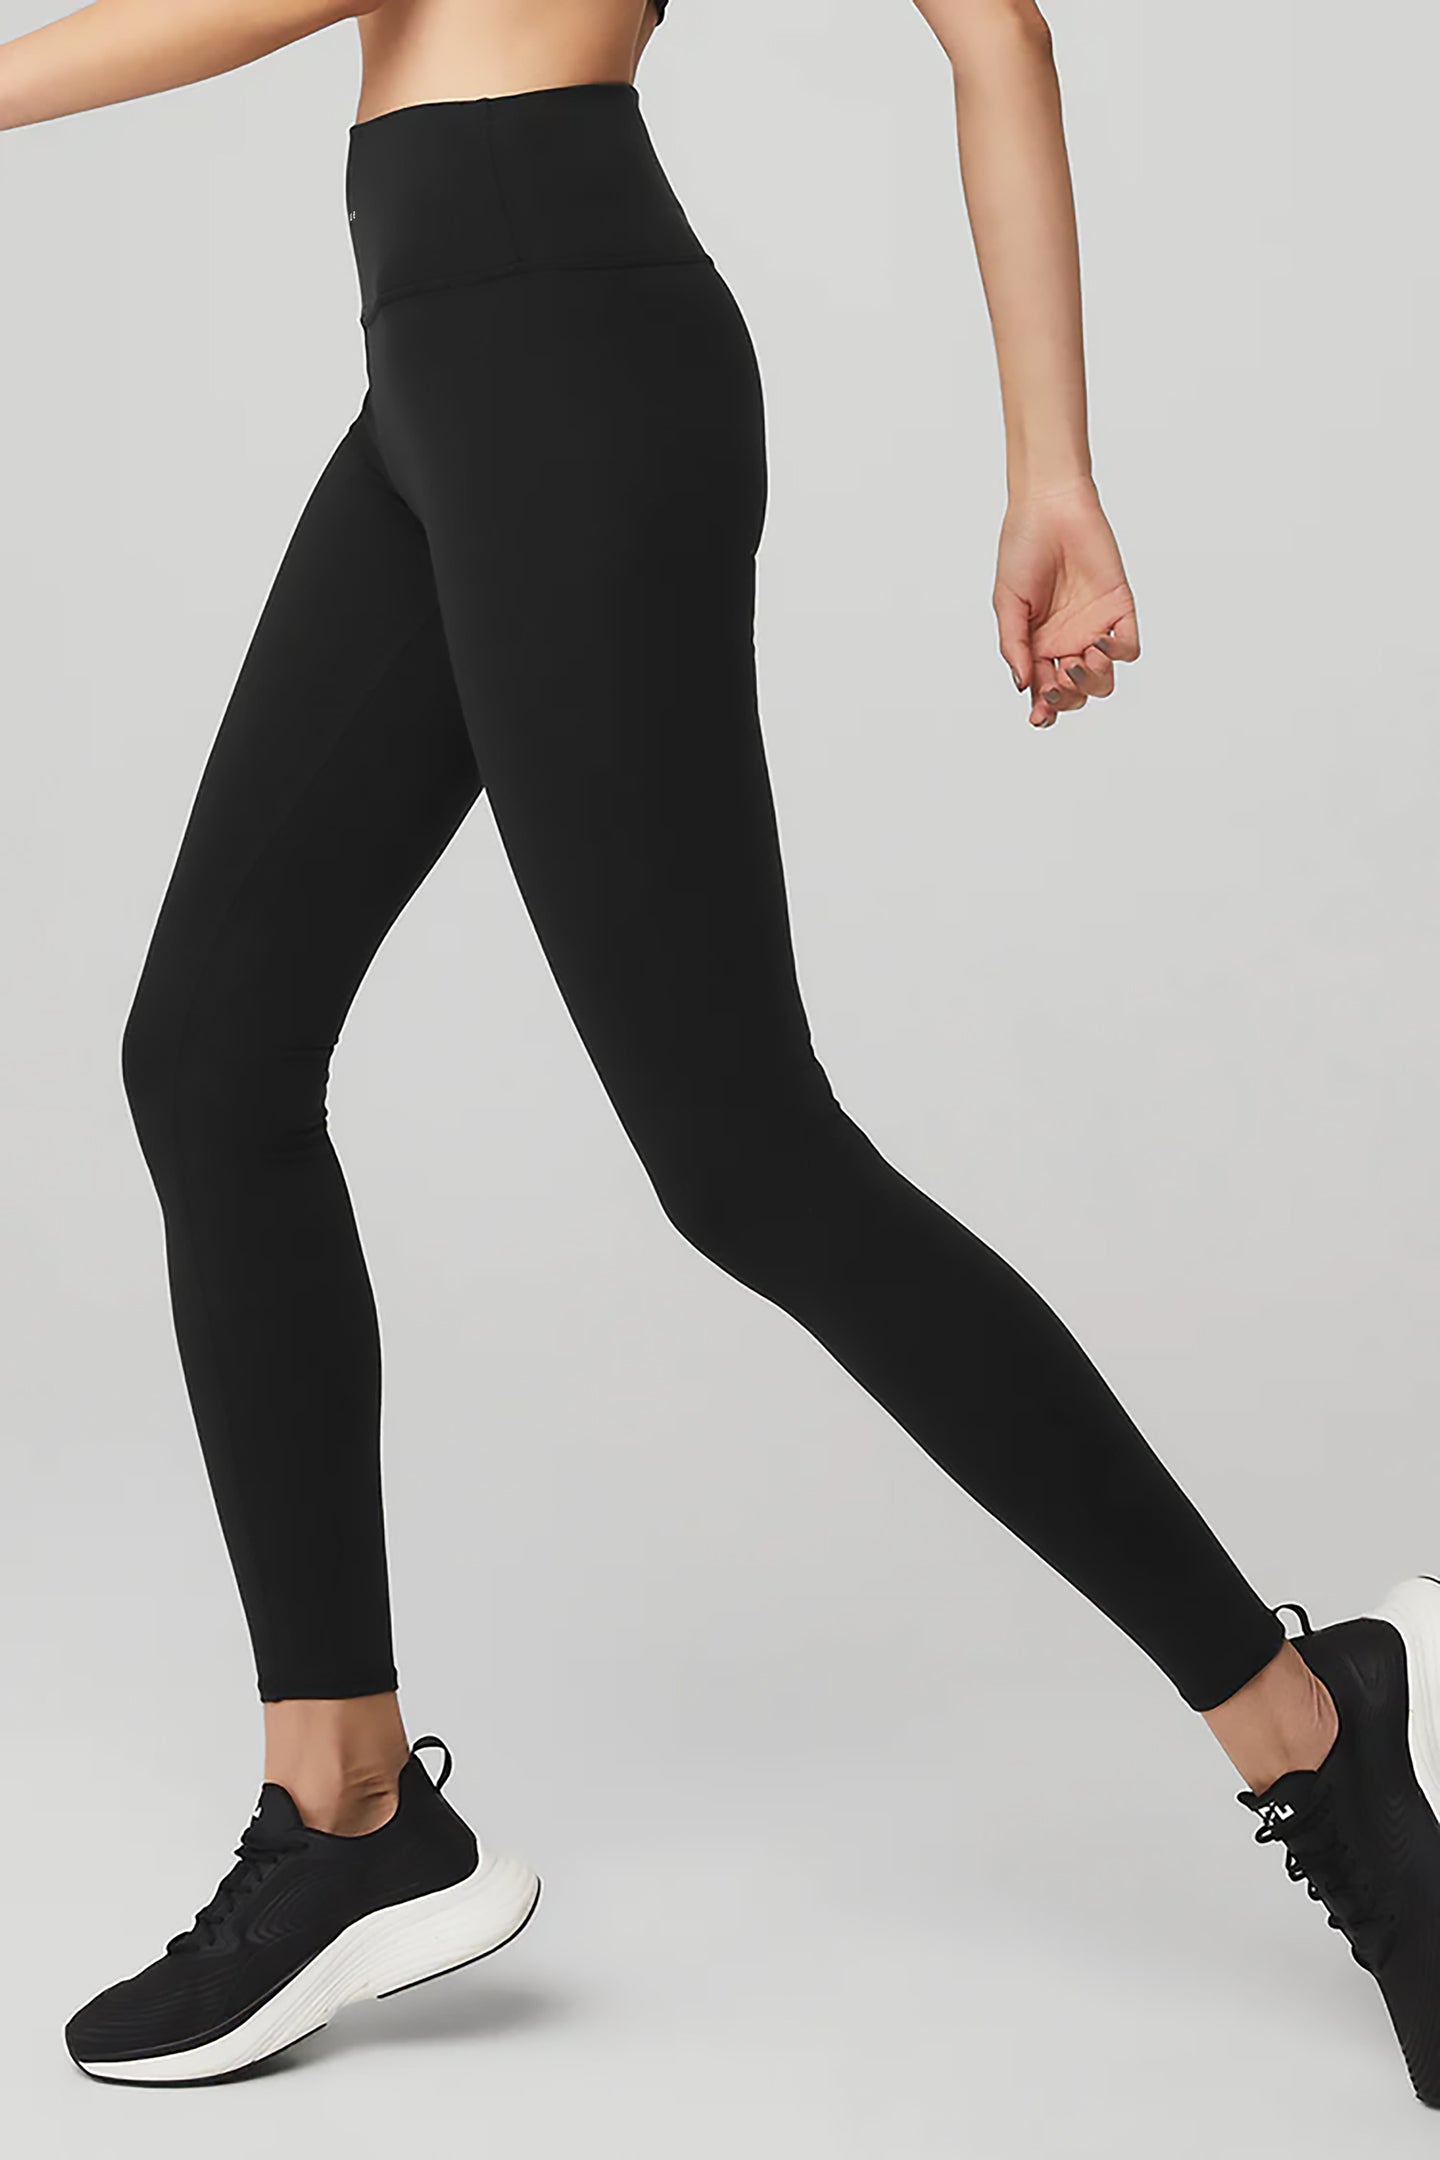 Create My Own Path Athleisure Leggings- Black – The Pulse Boutique